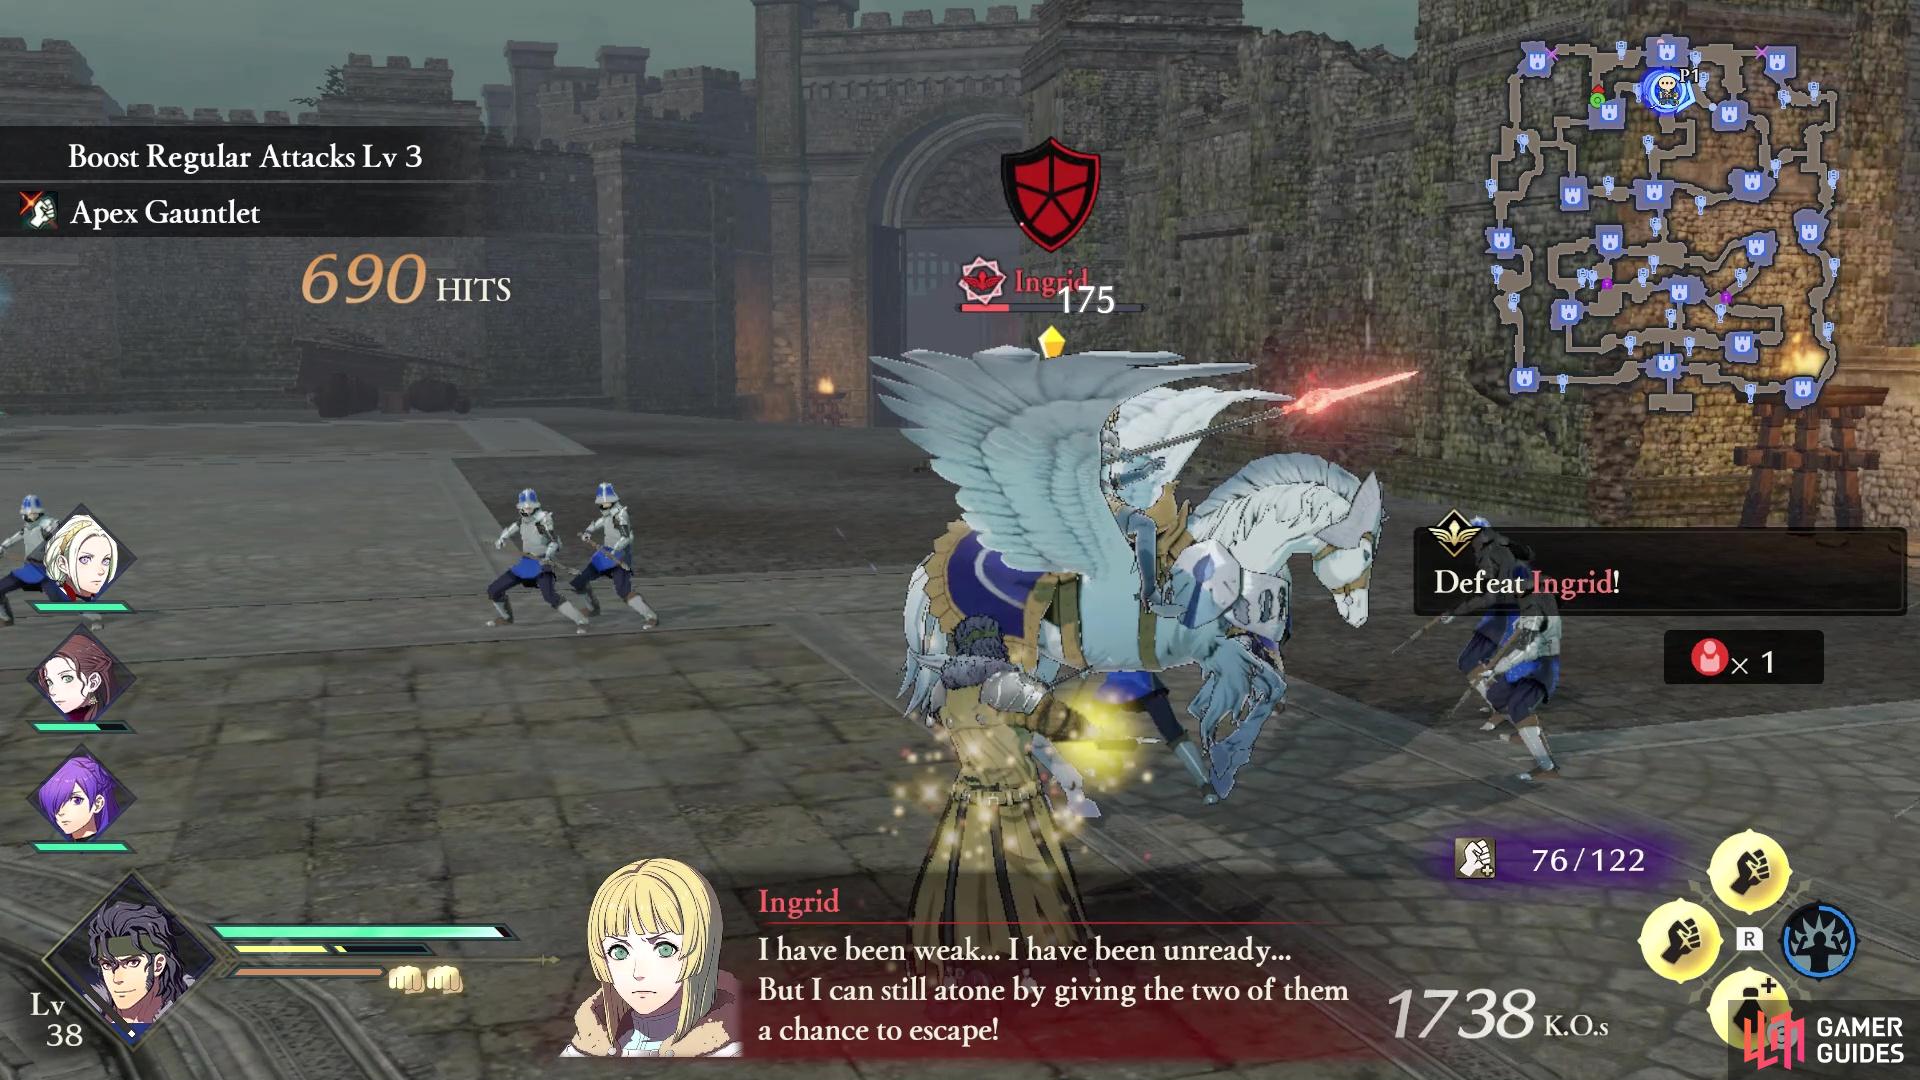 Ingrid appears to allow Claude to escape, after defeating him